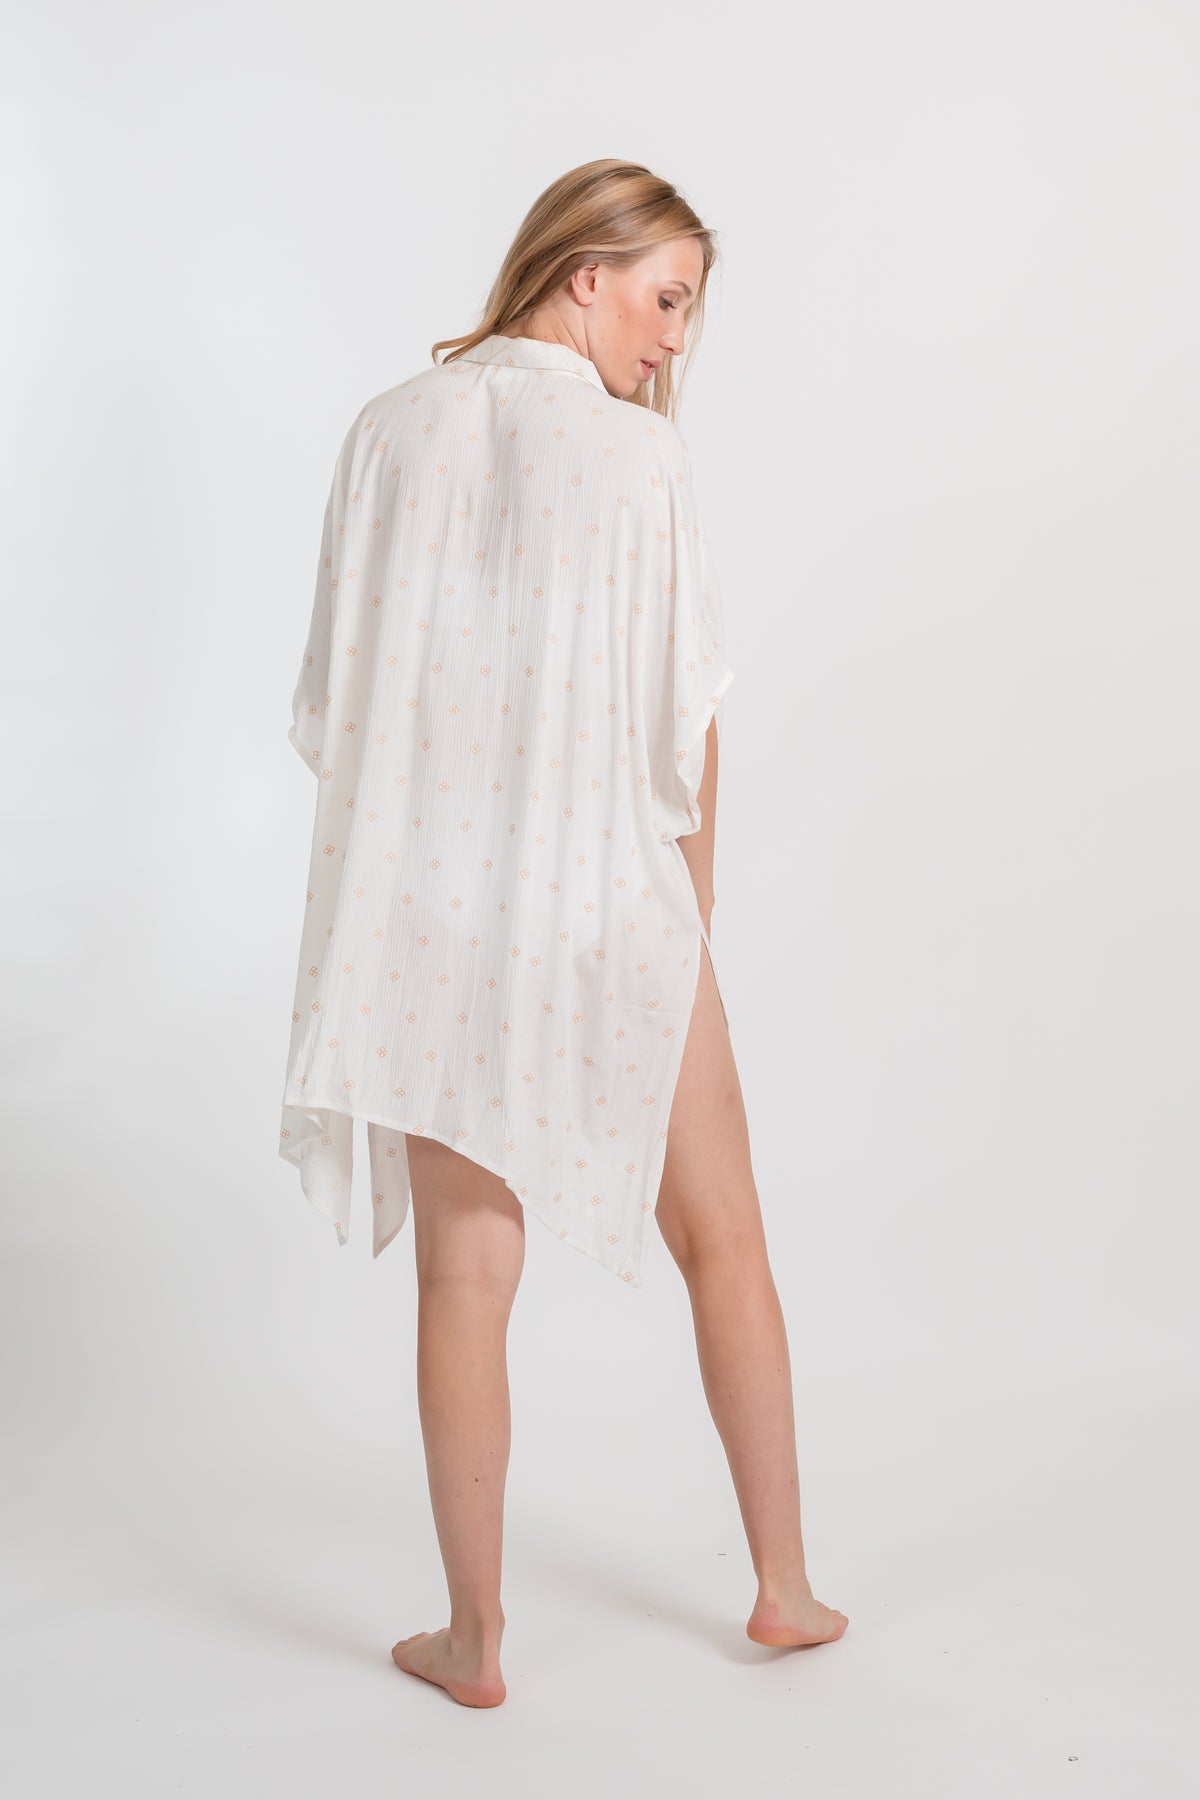 the back of a blonde hair female model looking down wearing a flowy big shirt dress in white with gold dot print